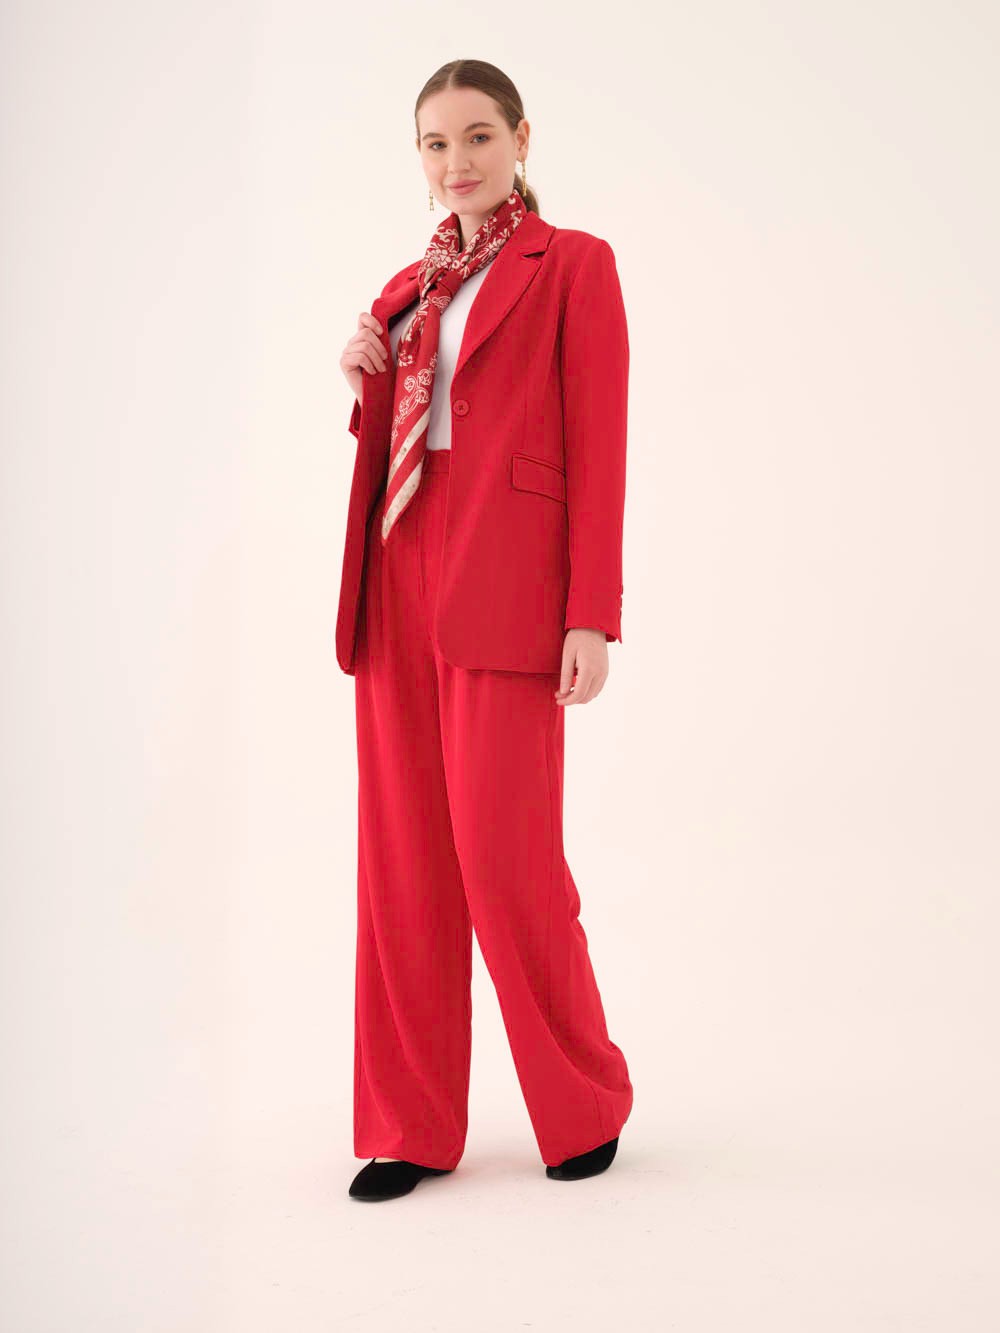 CHERRY RED SUIT